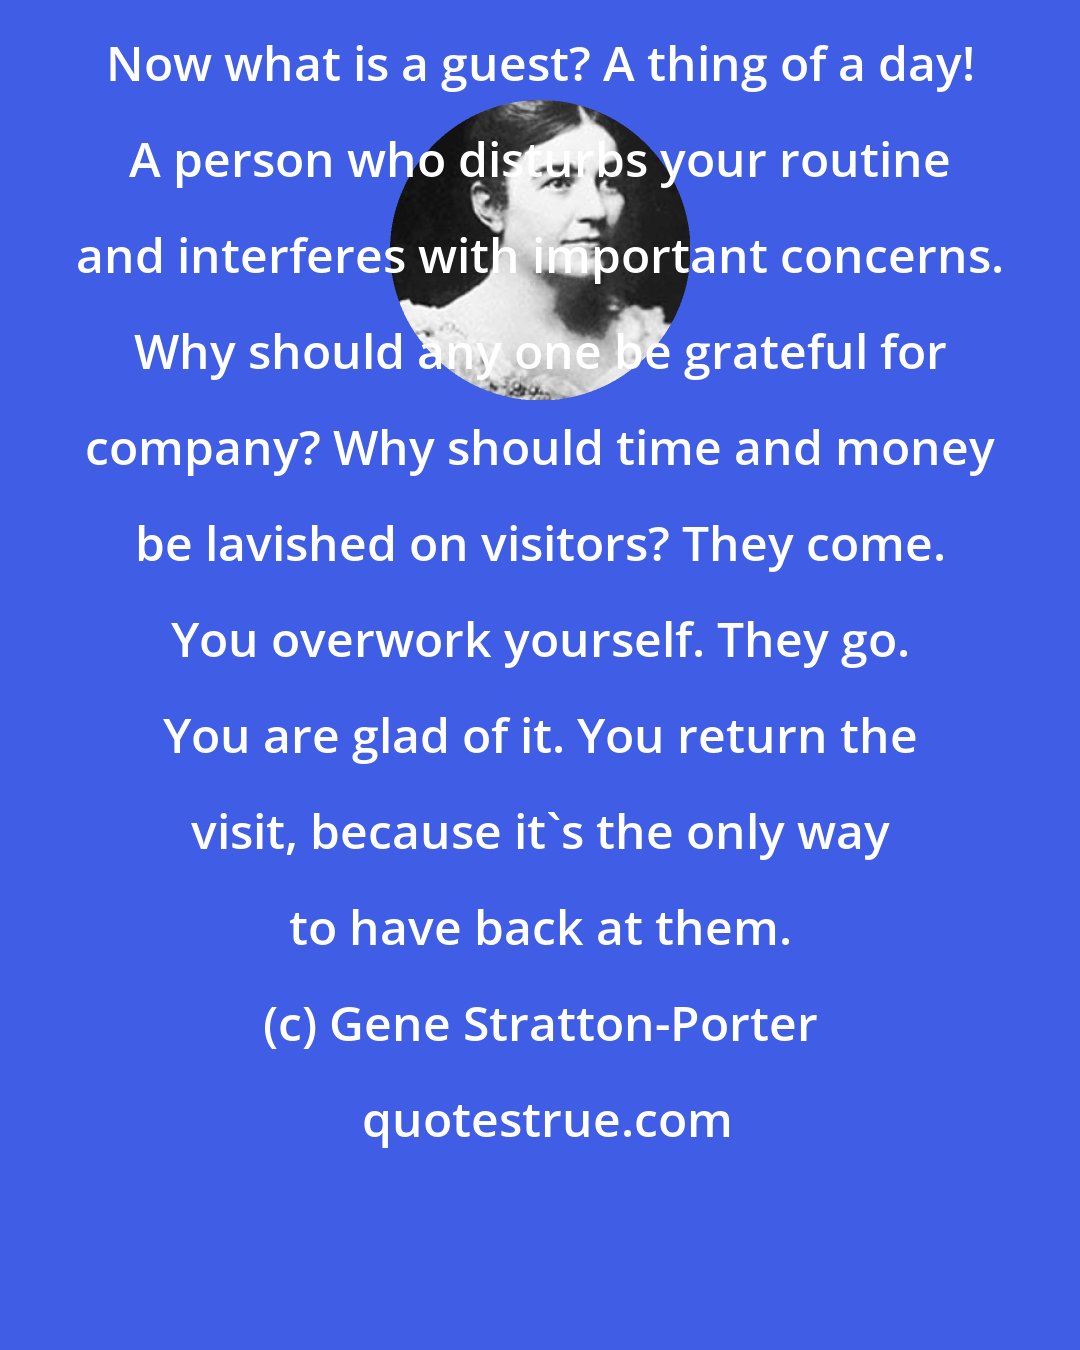 Gene Stratton-Porter: Now what is a guest? A thing of a day! A person who disturbs your routine and interferes with important concerns. Why should any one be grateful for company? Why should time and money be lavished on visitors? They come. You overwork yourself. They go. You are glad of it. You return the visit, because it's the only way to have back at them.